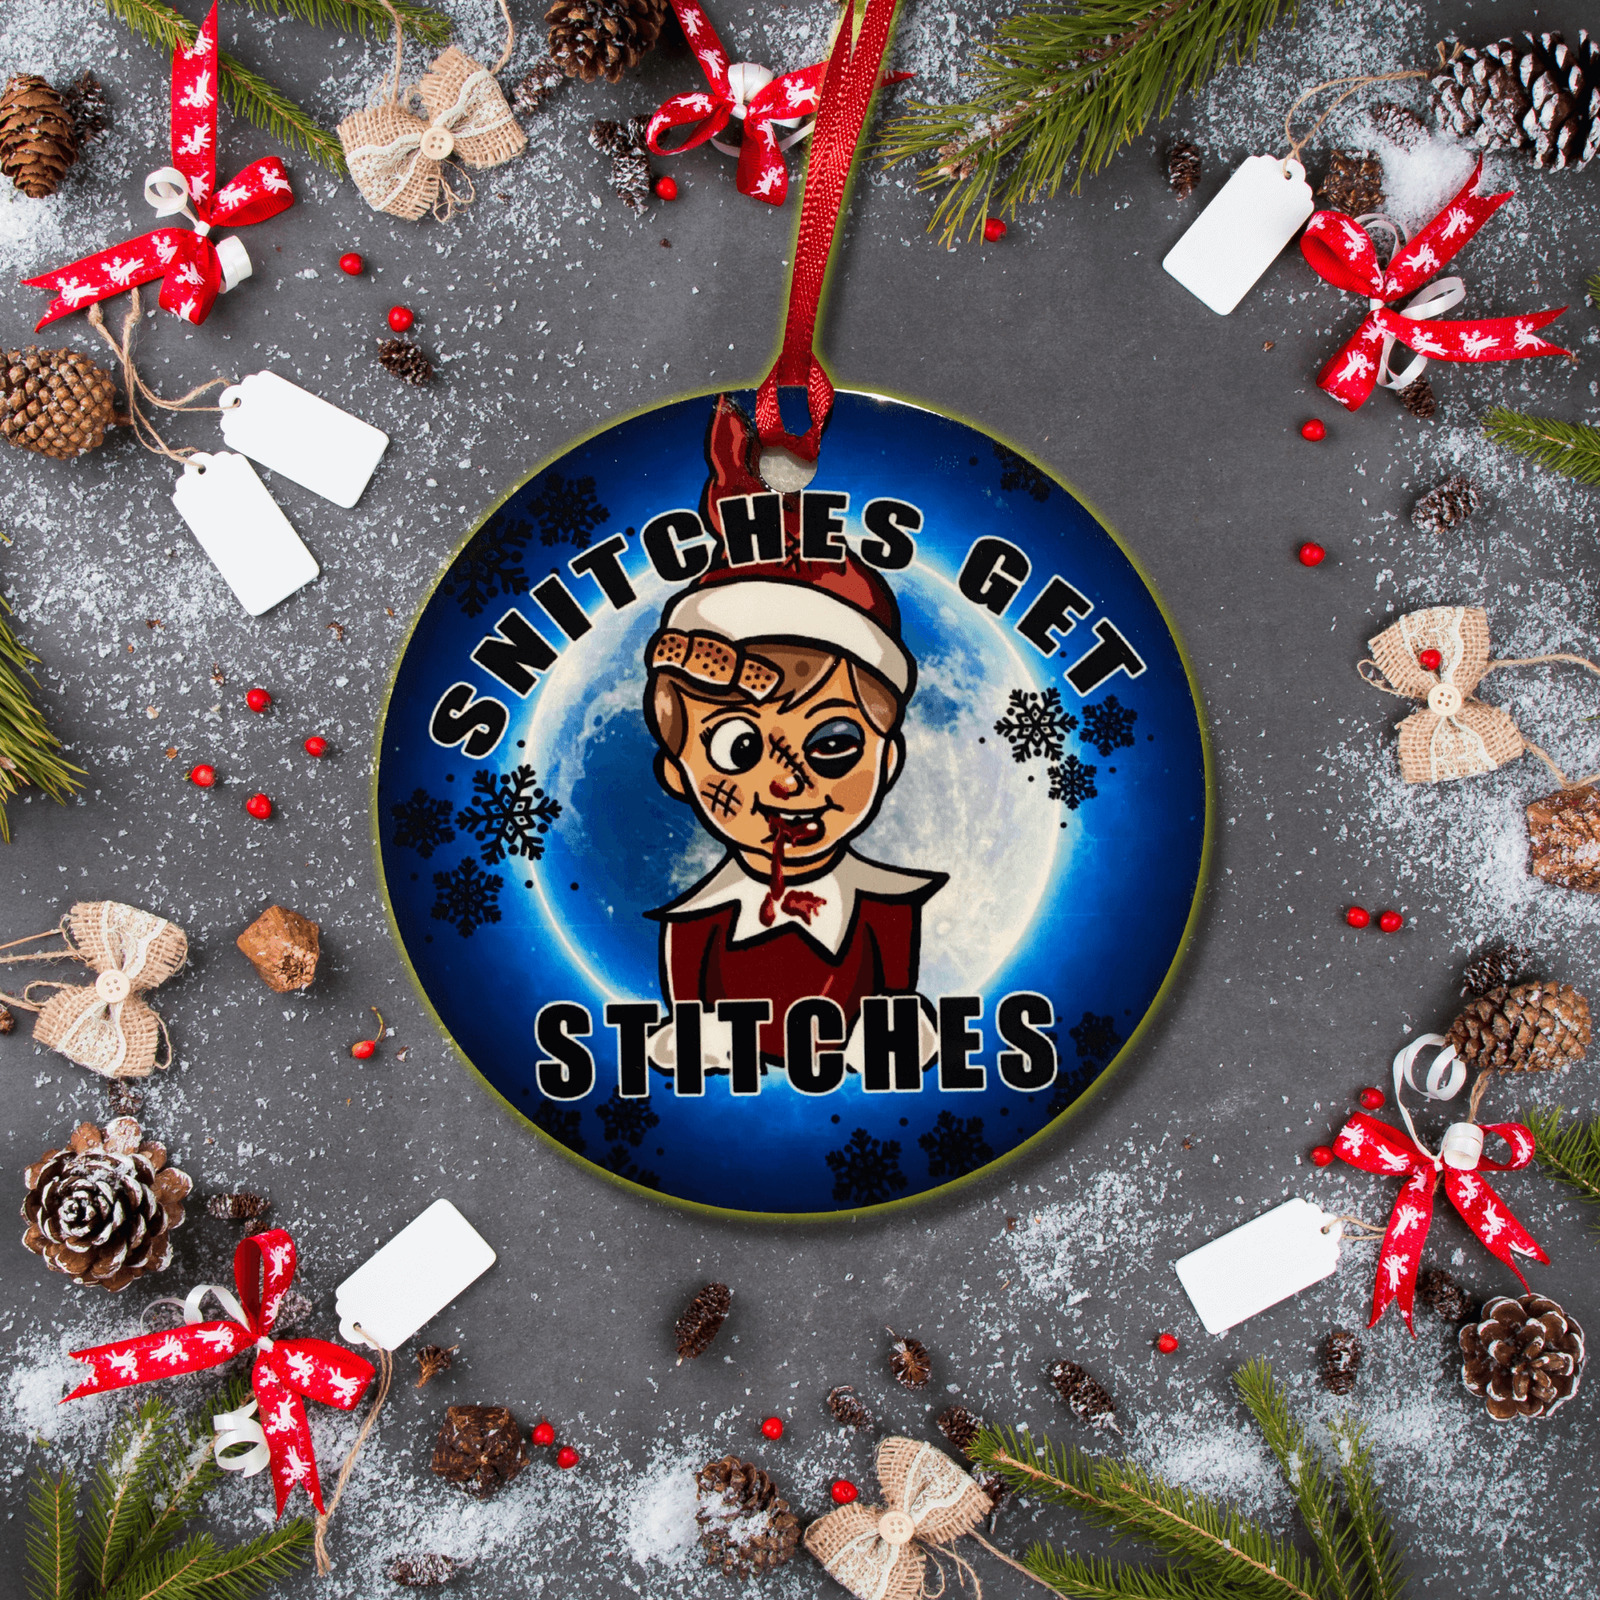 Snitches Get Stitches Funny Christmas Ornament